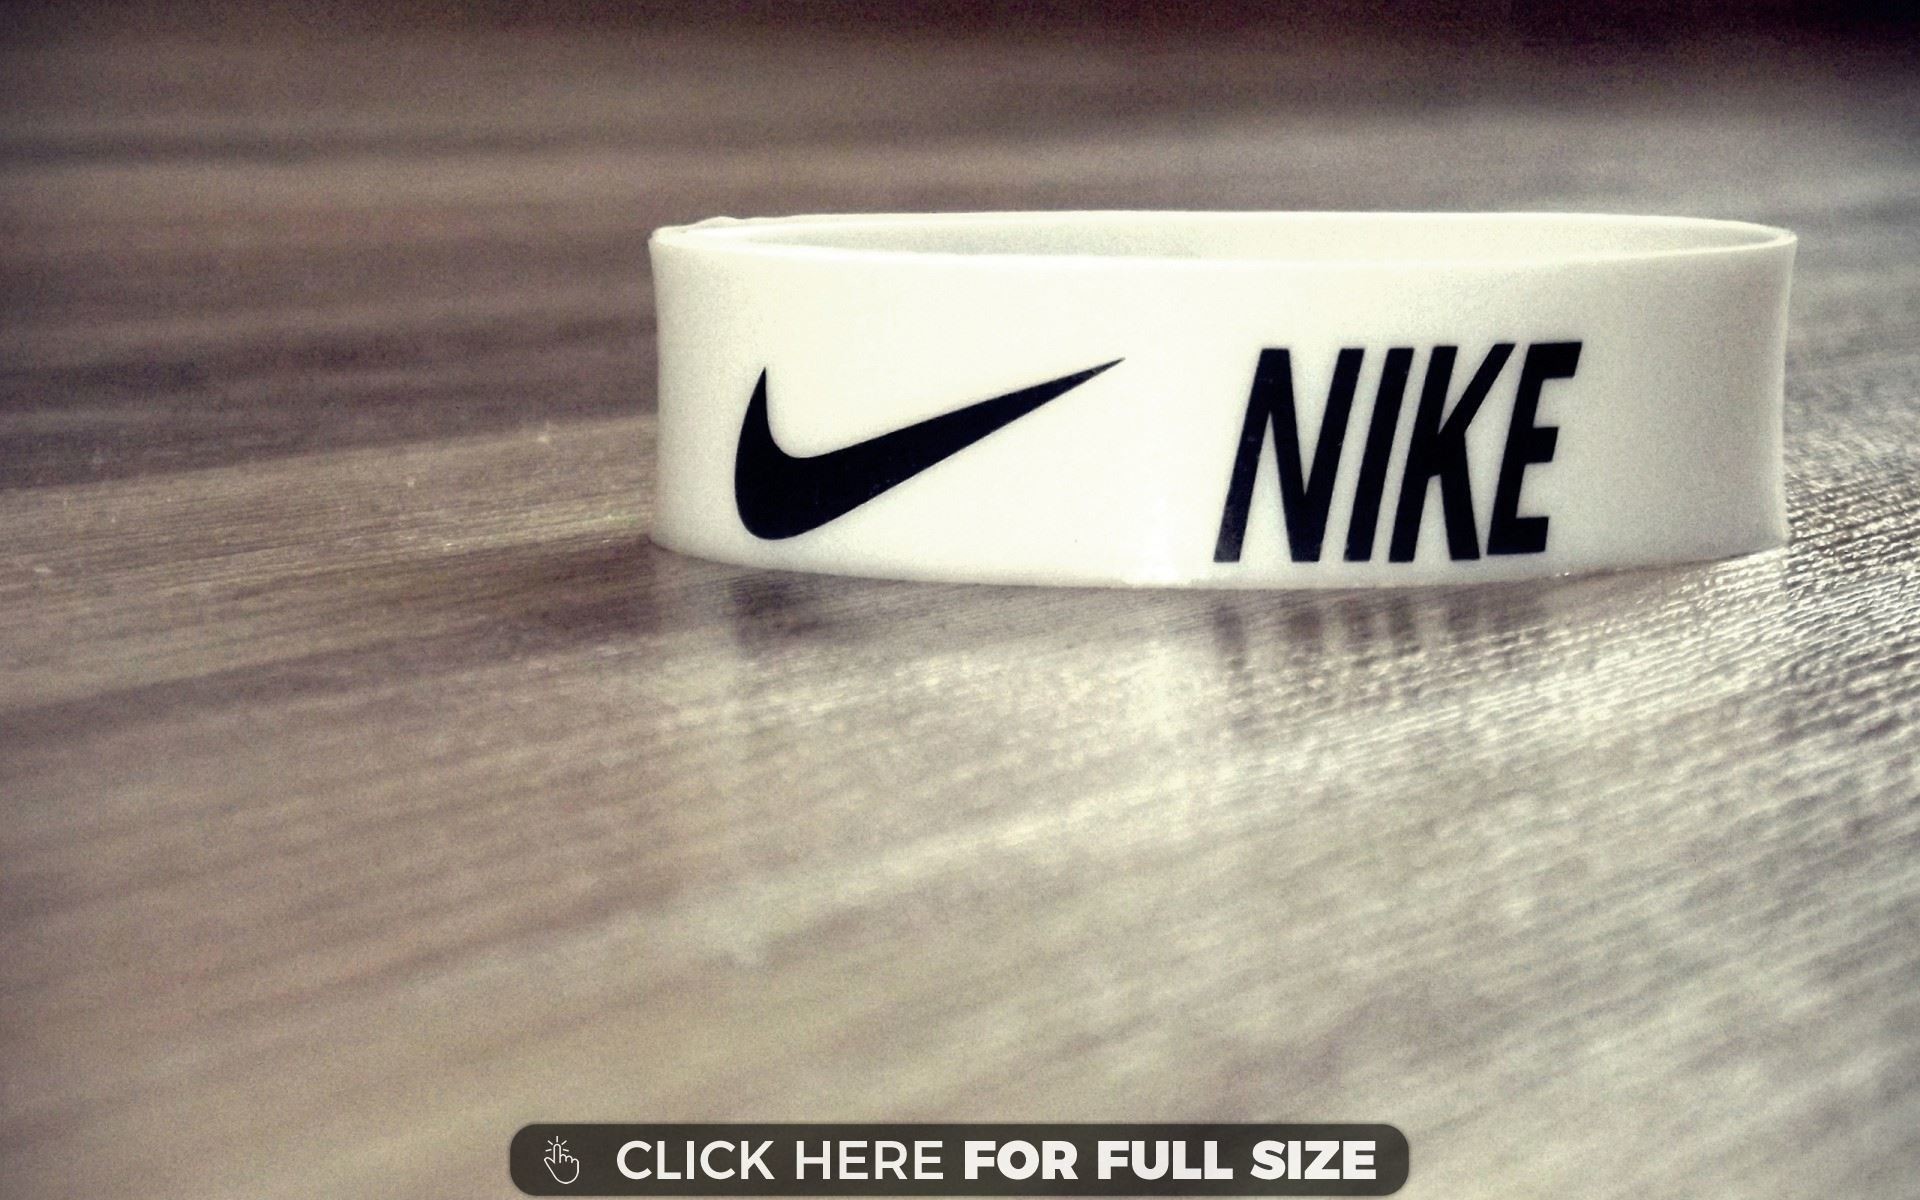 1920x1200   Hd Wallpapers Nike Shoes 1200 X 700 1016 Kb Png | HD  Wallpapers - 100%